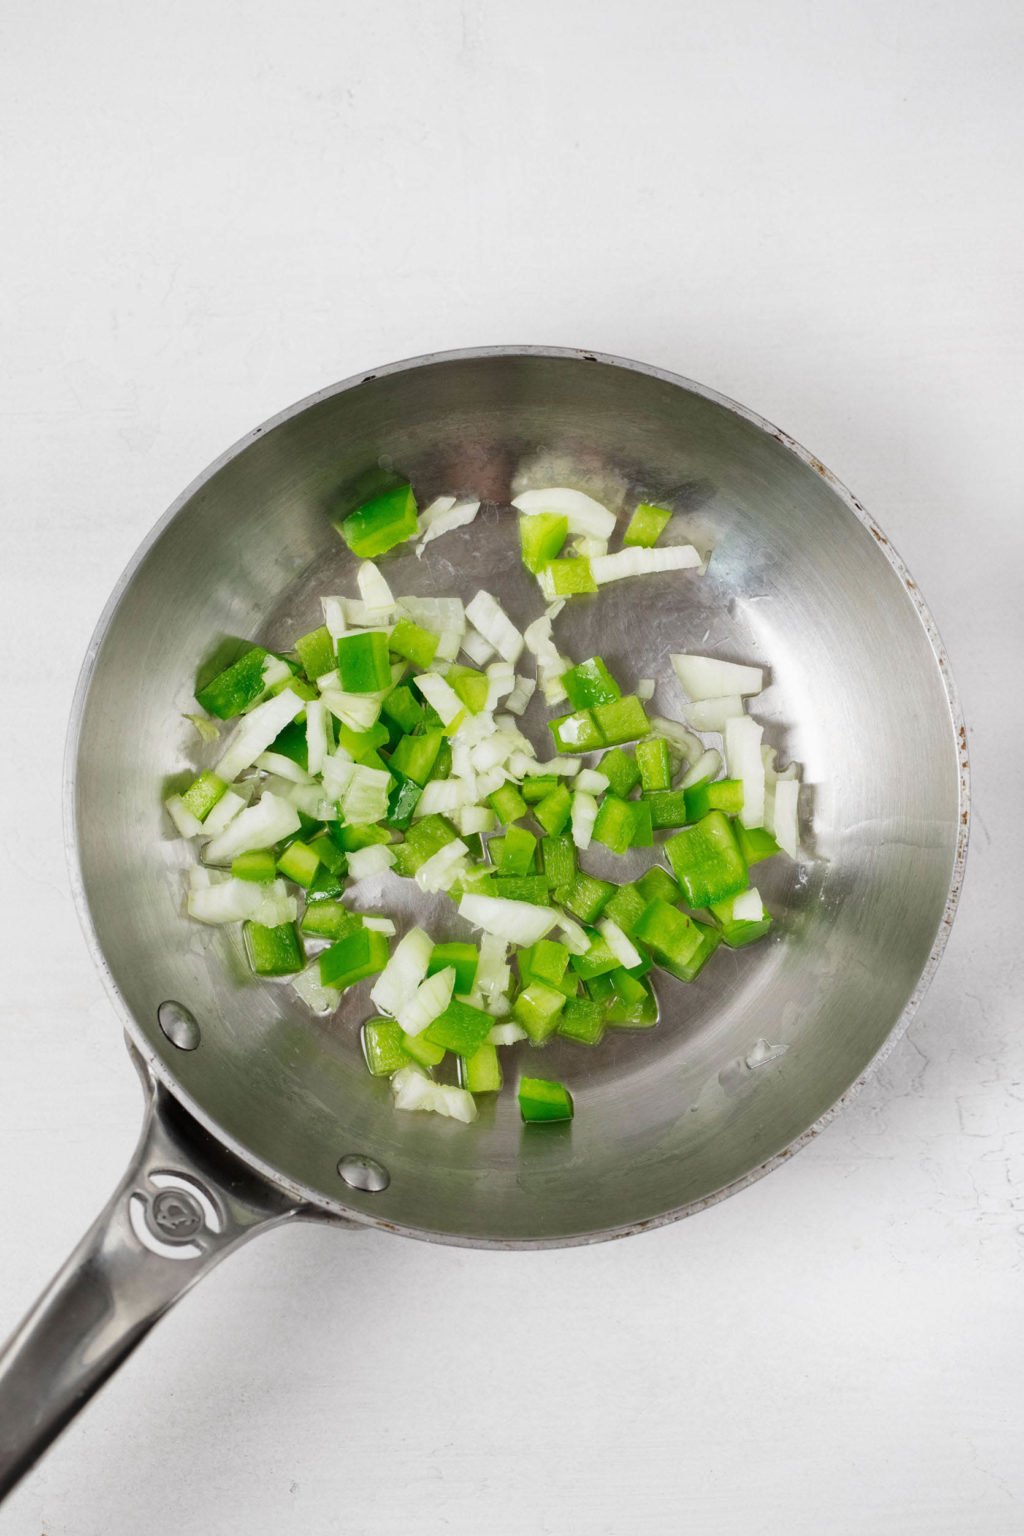 Chopped onion and green bell pepper are being sautéed in a small frying pan. It rests on a white surface.